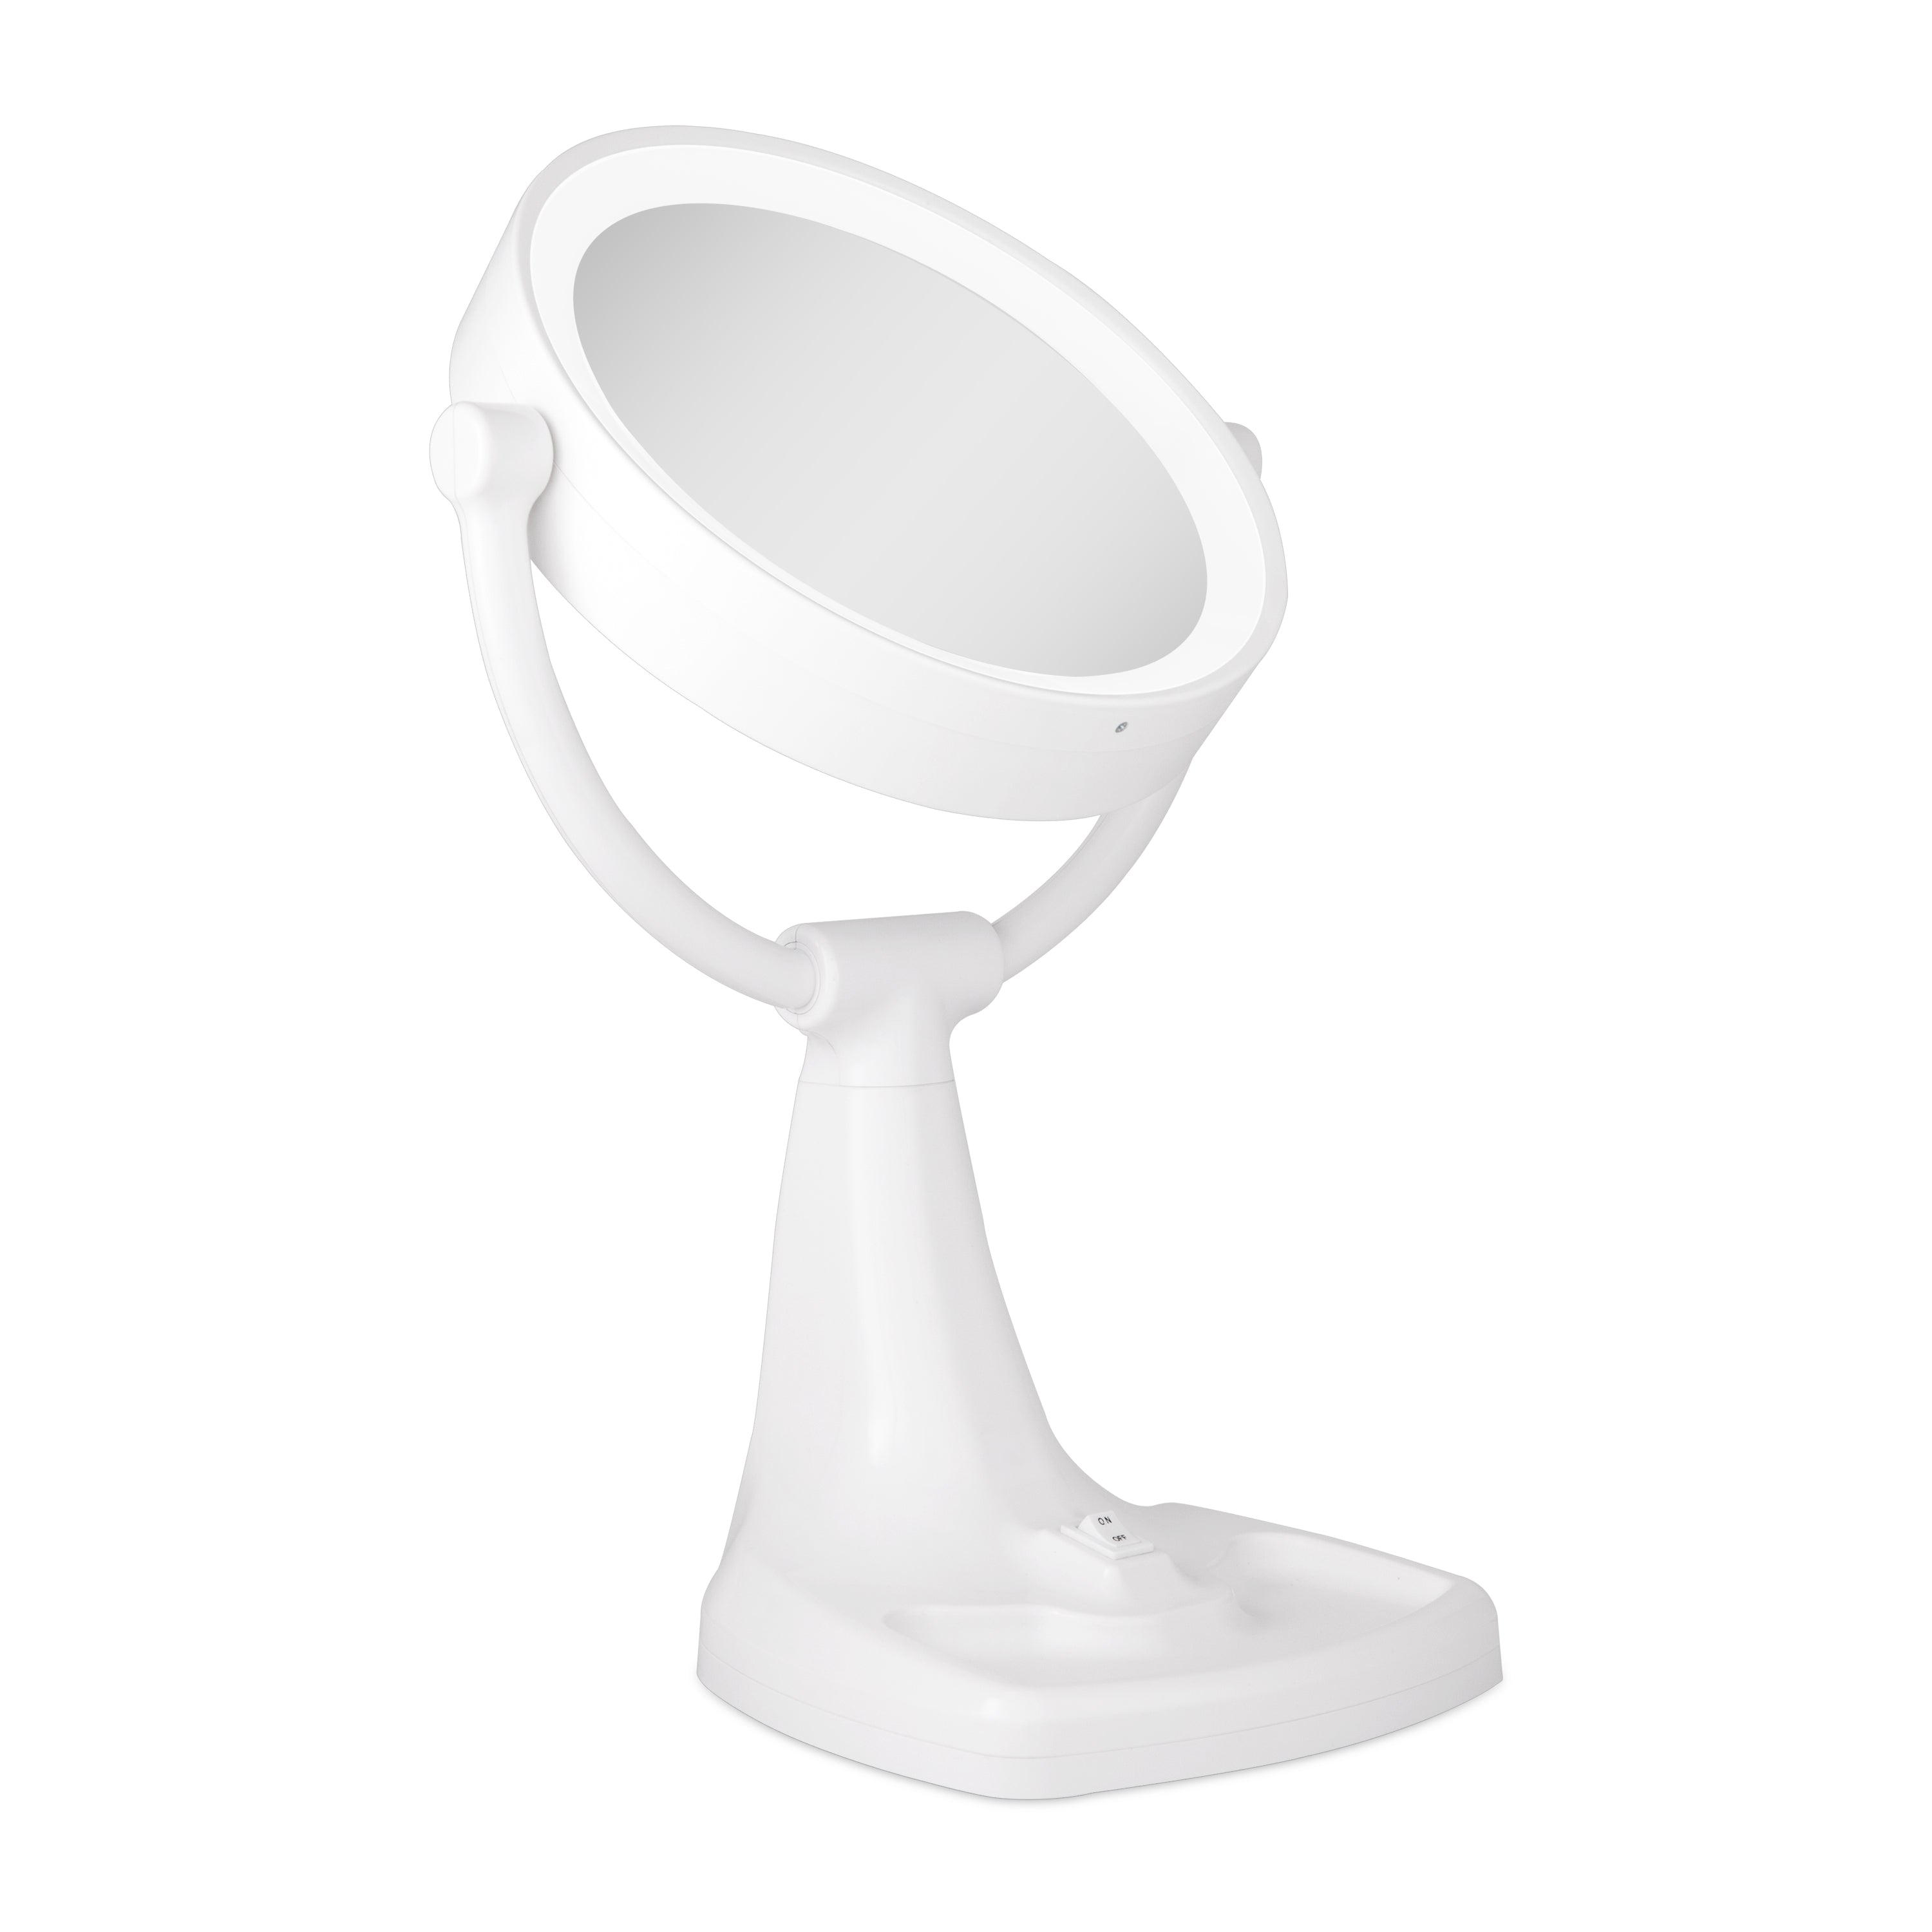 Eleganze Bright Lighted Makeup Mirror with Magnification